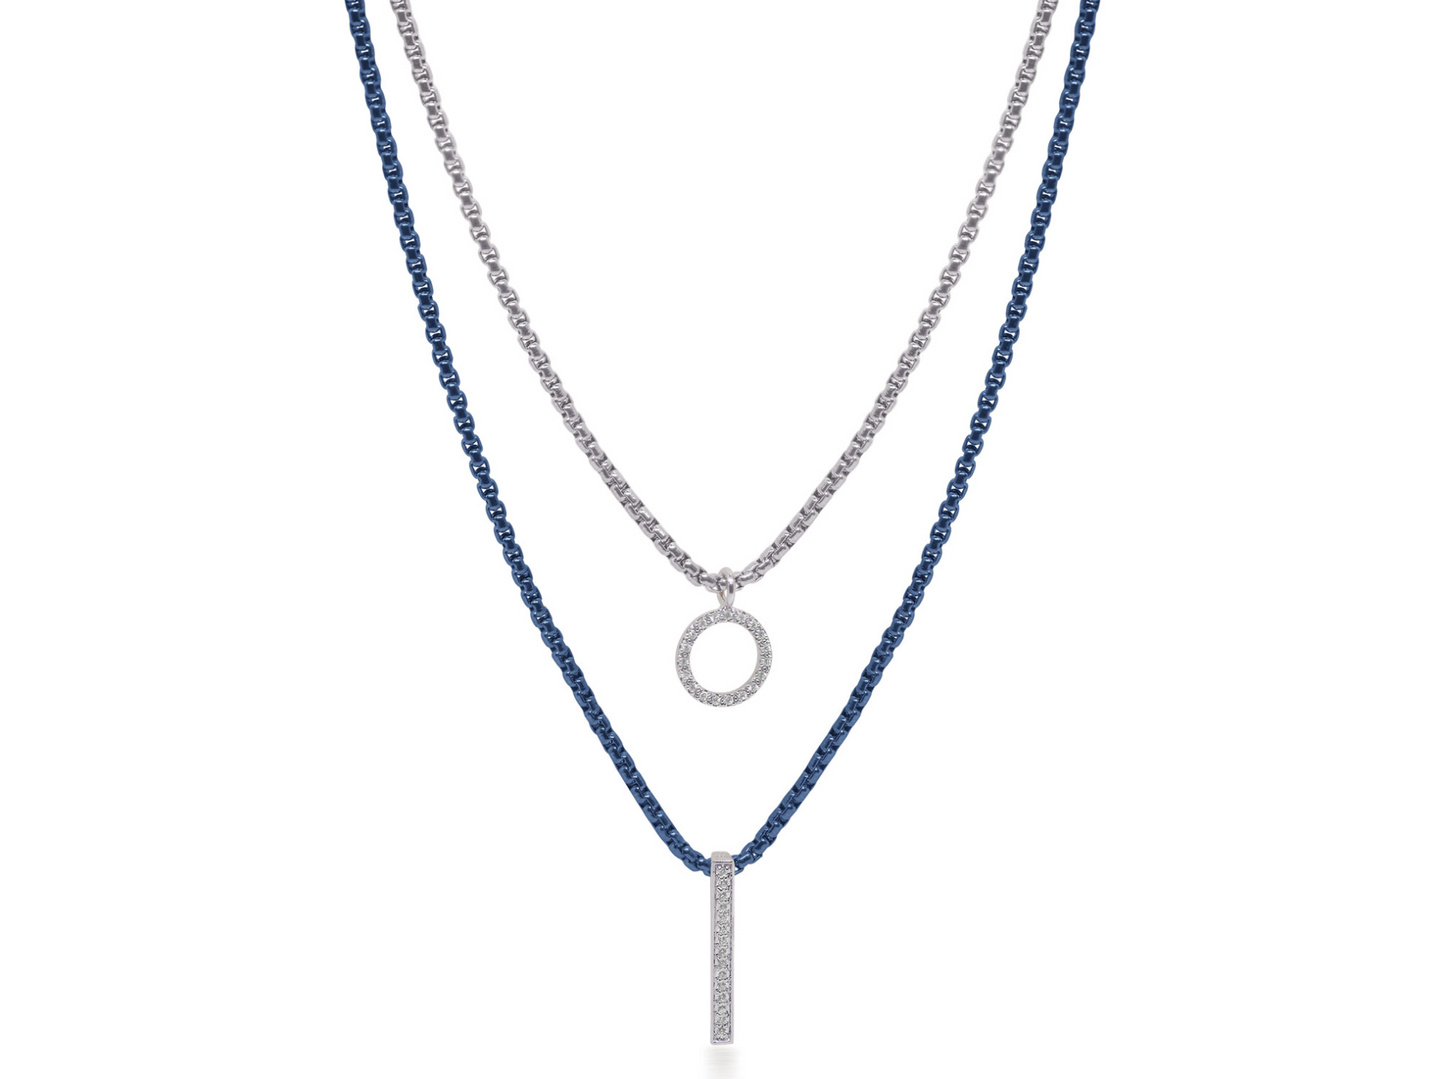 Blueberry & Grey Chain Double Layered Necklace with 14kt White Gold & Diamonds